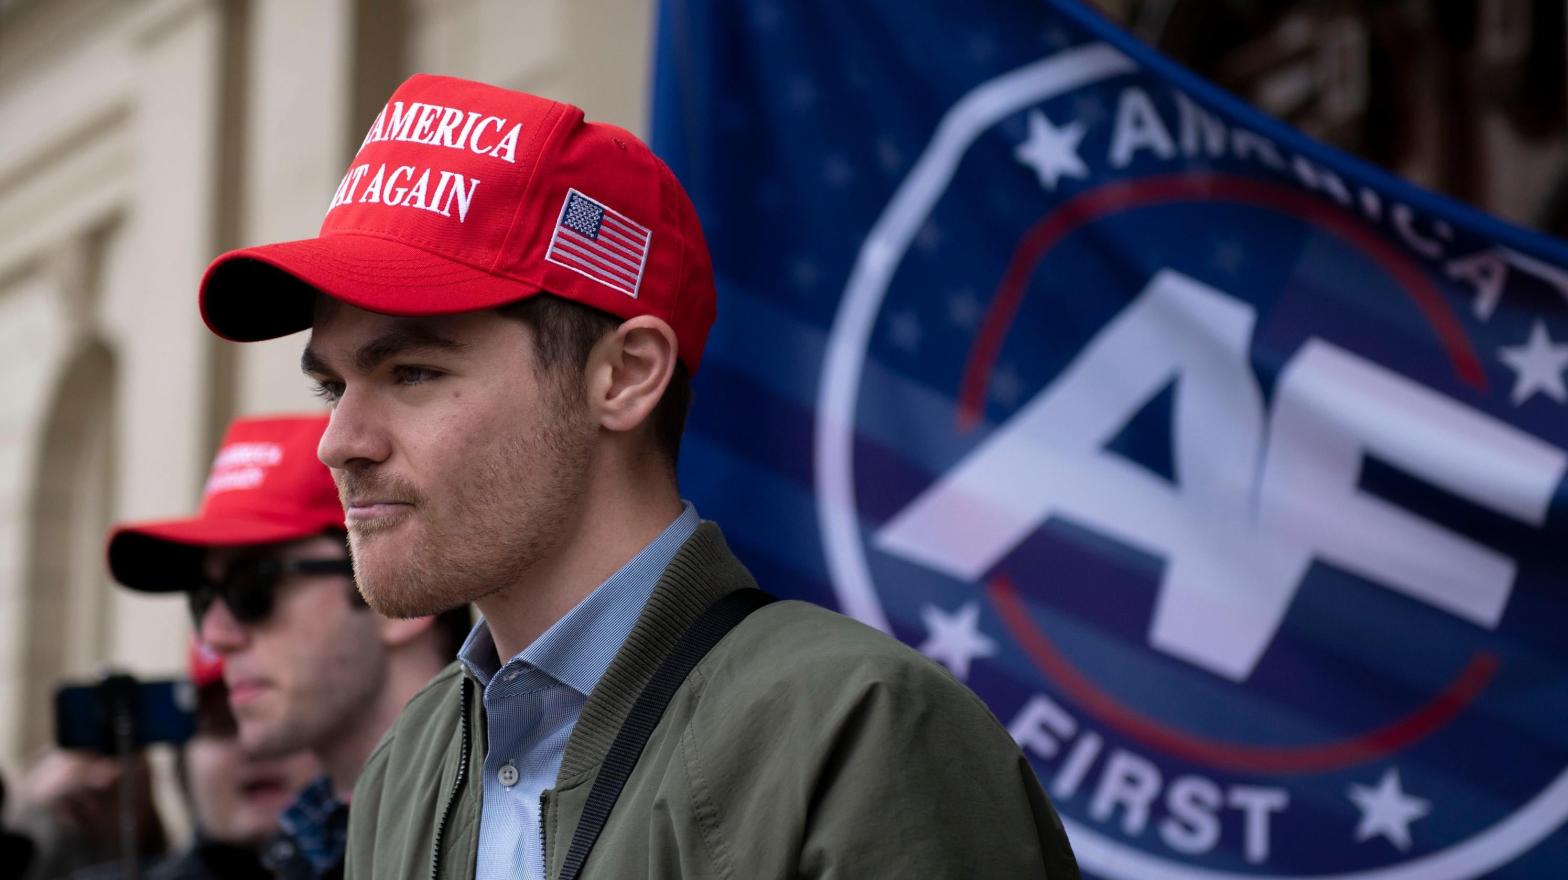 The 24-year-old white supremacist Nick Fuentes has been at the centre of multiple far right campaigns, including multiple stop the steal rallies. His online fan group have executed multiple digital harassment campaigns against critics. (Photo: Nicole Hester/Ann Arbor News, AP)